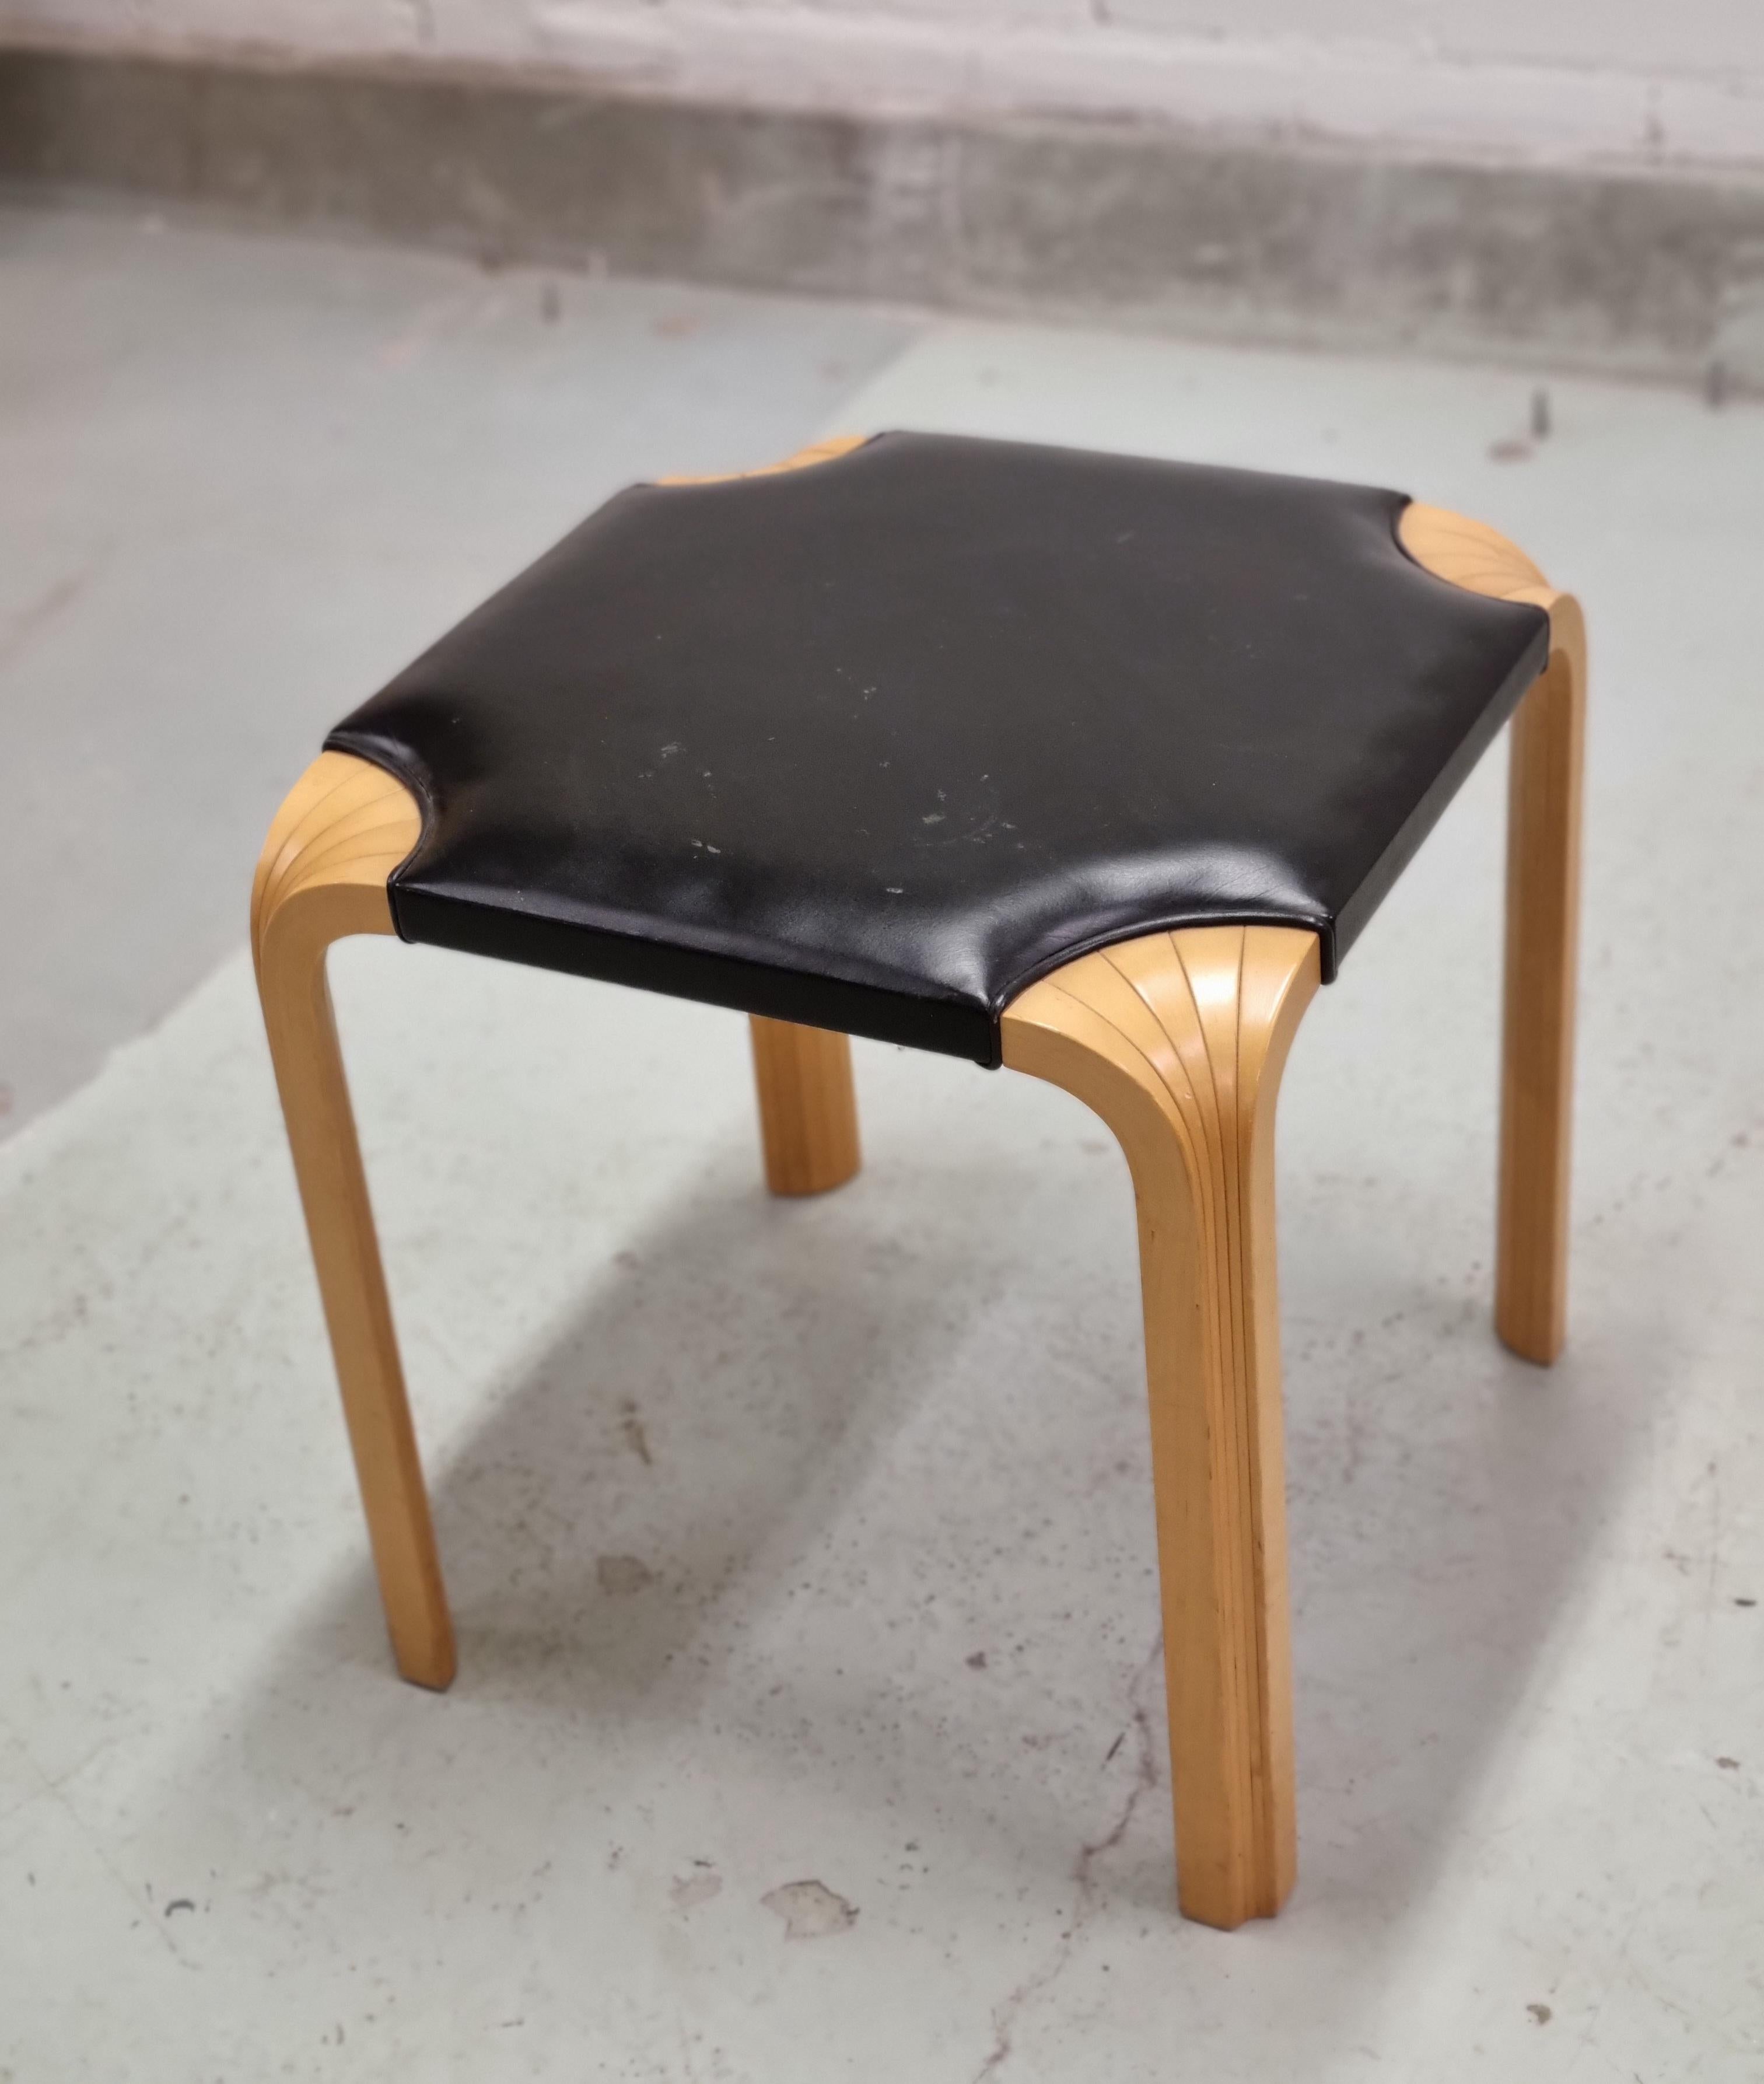 This stool was designed by Alvar Aalto for Artek originally in the 1950s. We have noticed through the years that this stool has been often used as a bed side table. It can also be used as a table or as a flower stand for example. A simple but